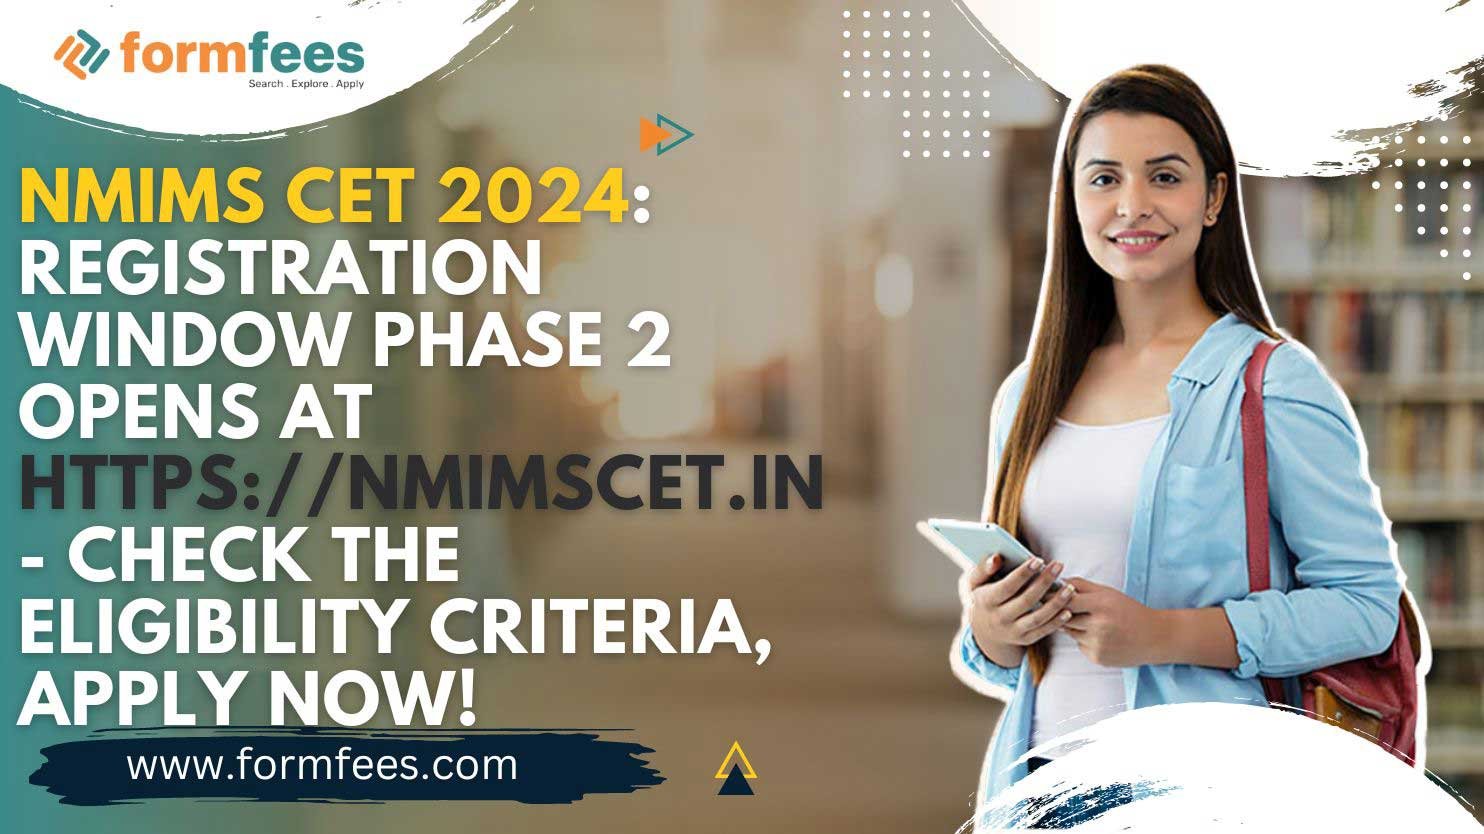 NMIMS CET 2024: Registration Window Phase 2 Opens at https://nmimscet.in - Check the Eligibility Criteria, APPLY NOW!